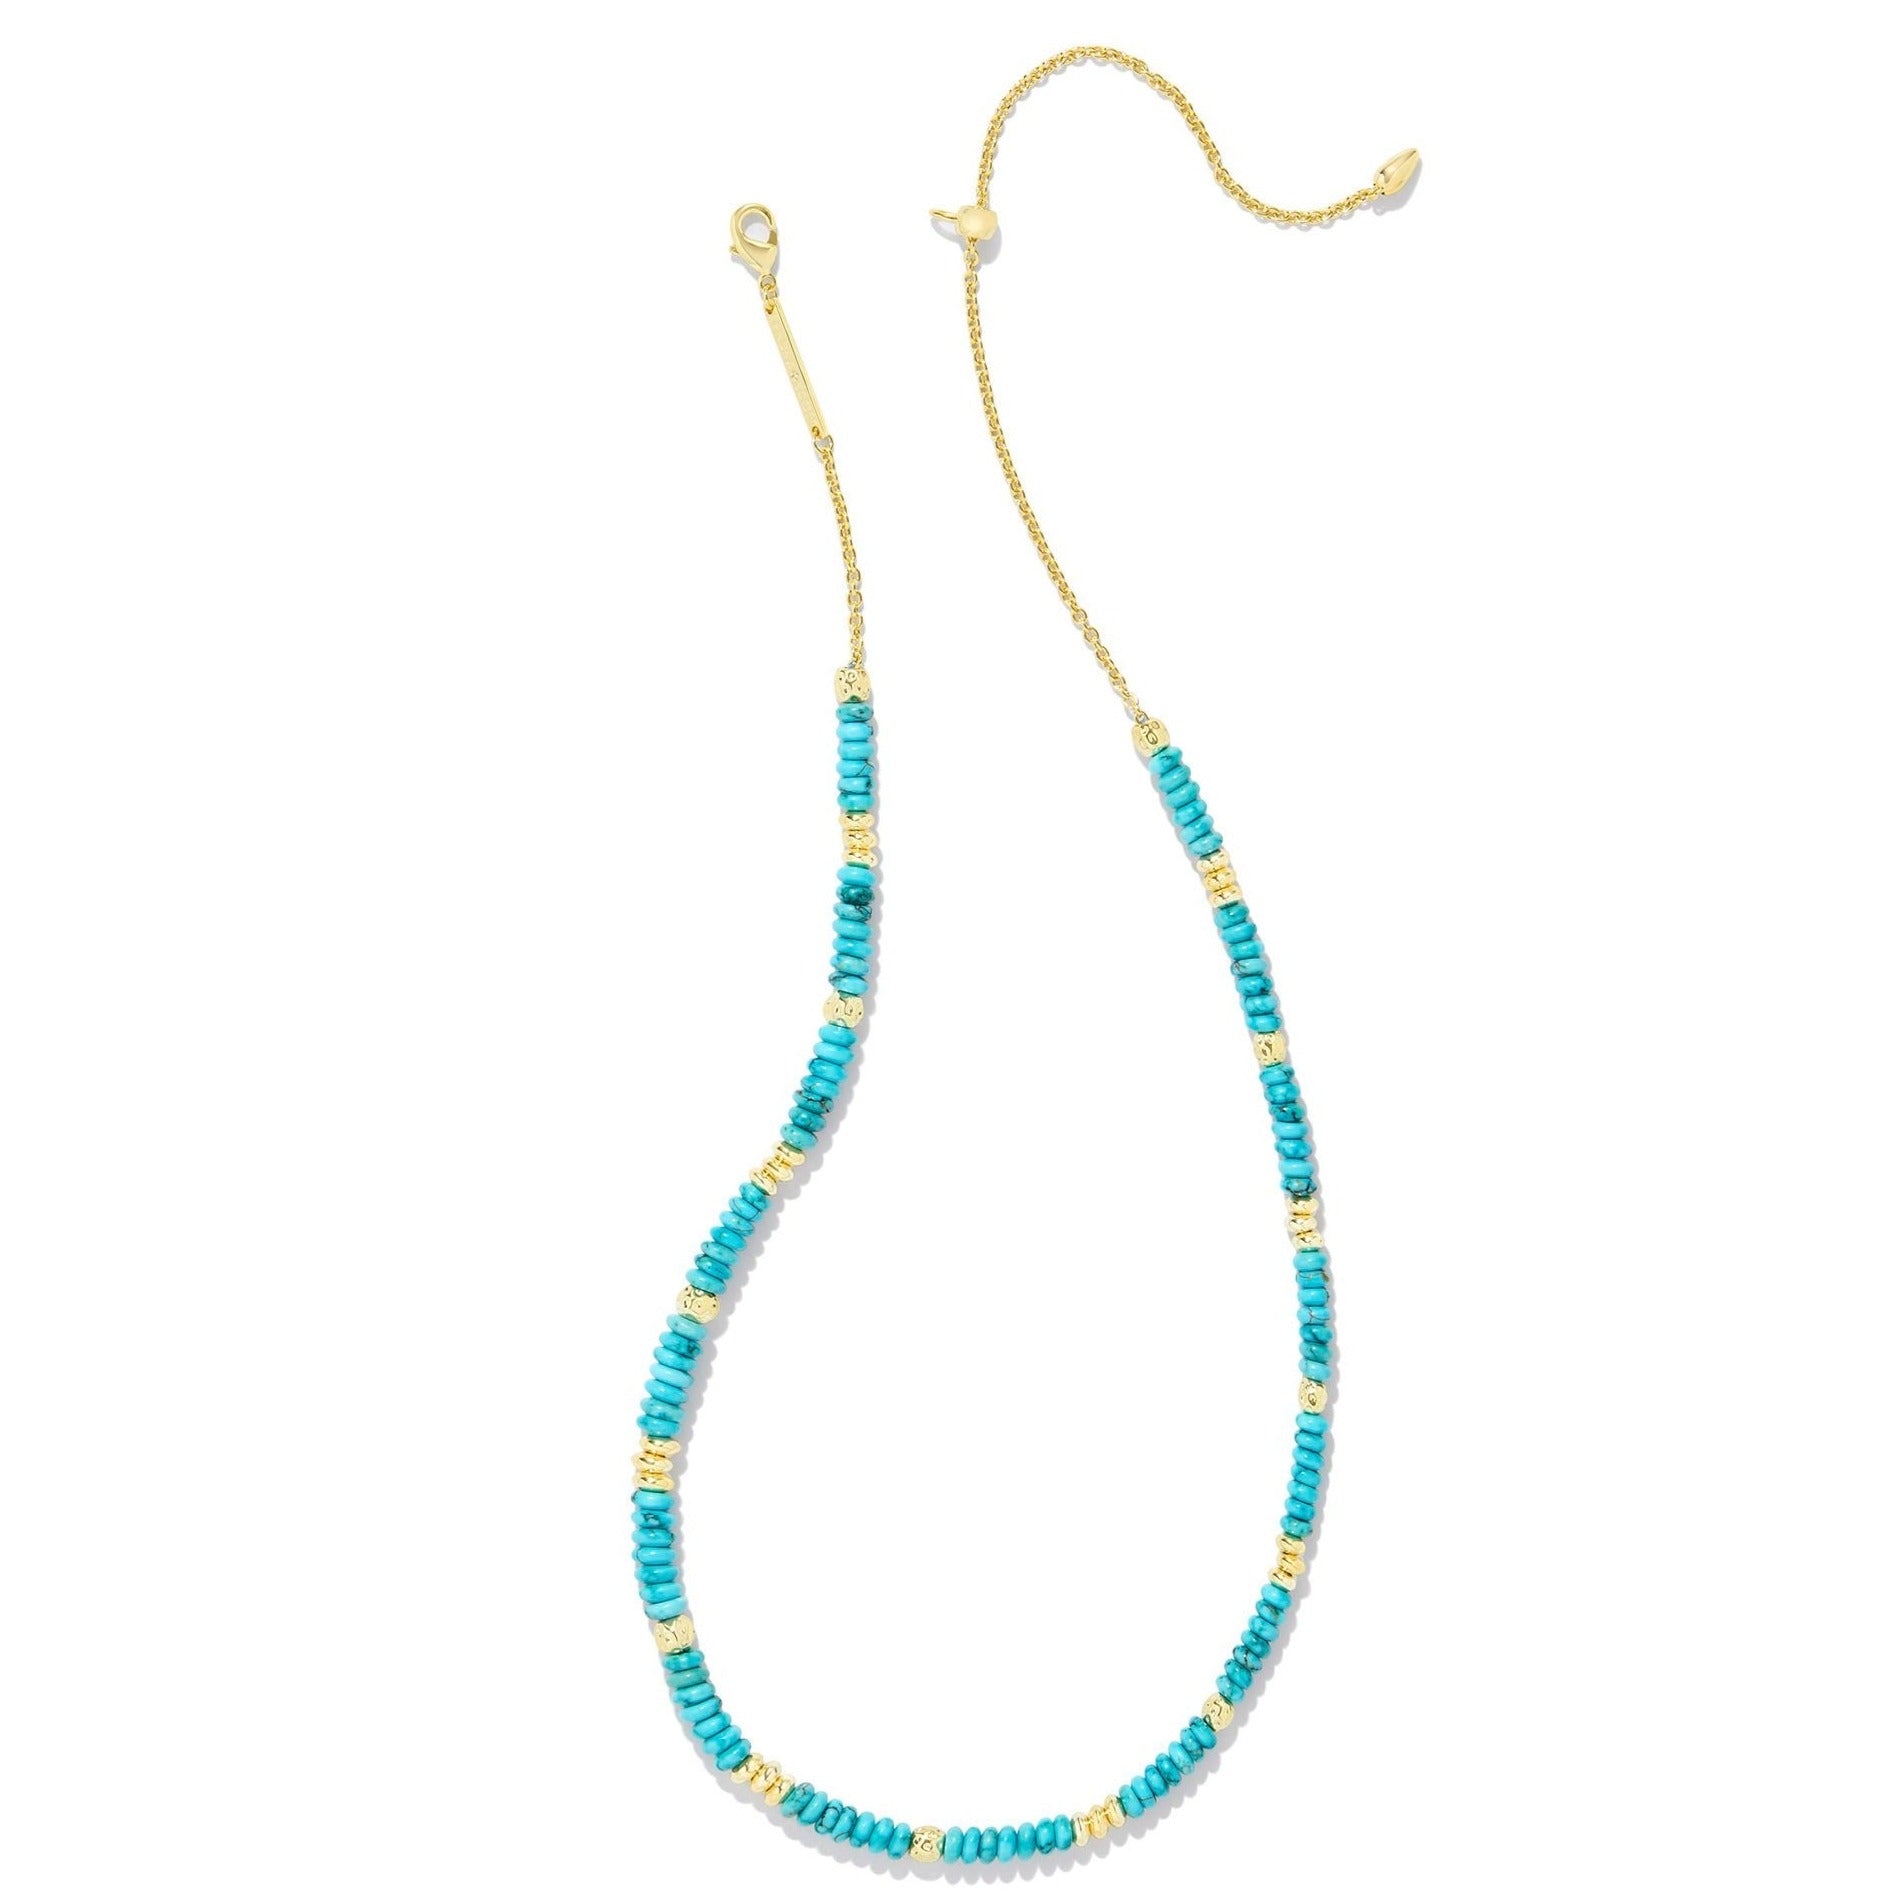 Kendra Scott | Deliah Gold Strand Necklace in Variegated Turquoise Magnesite - Giddy Up Glamour Boutique